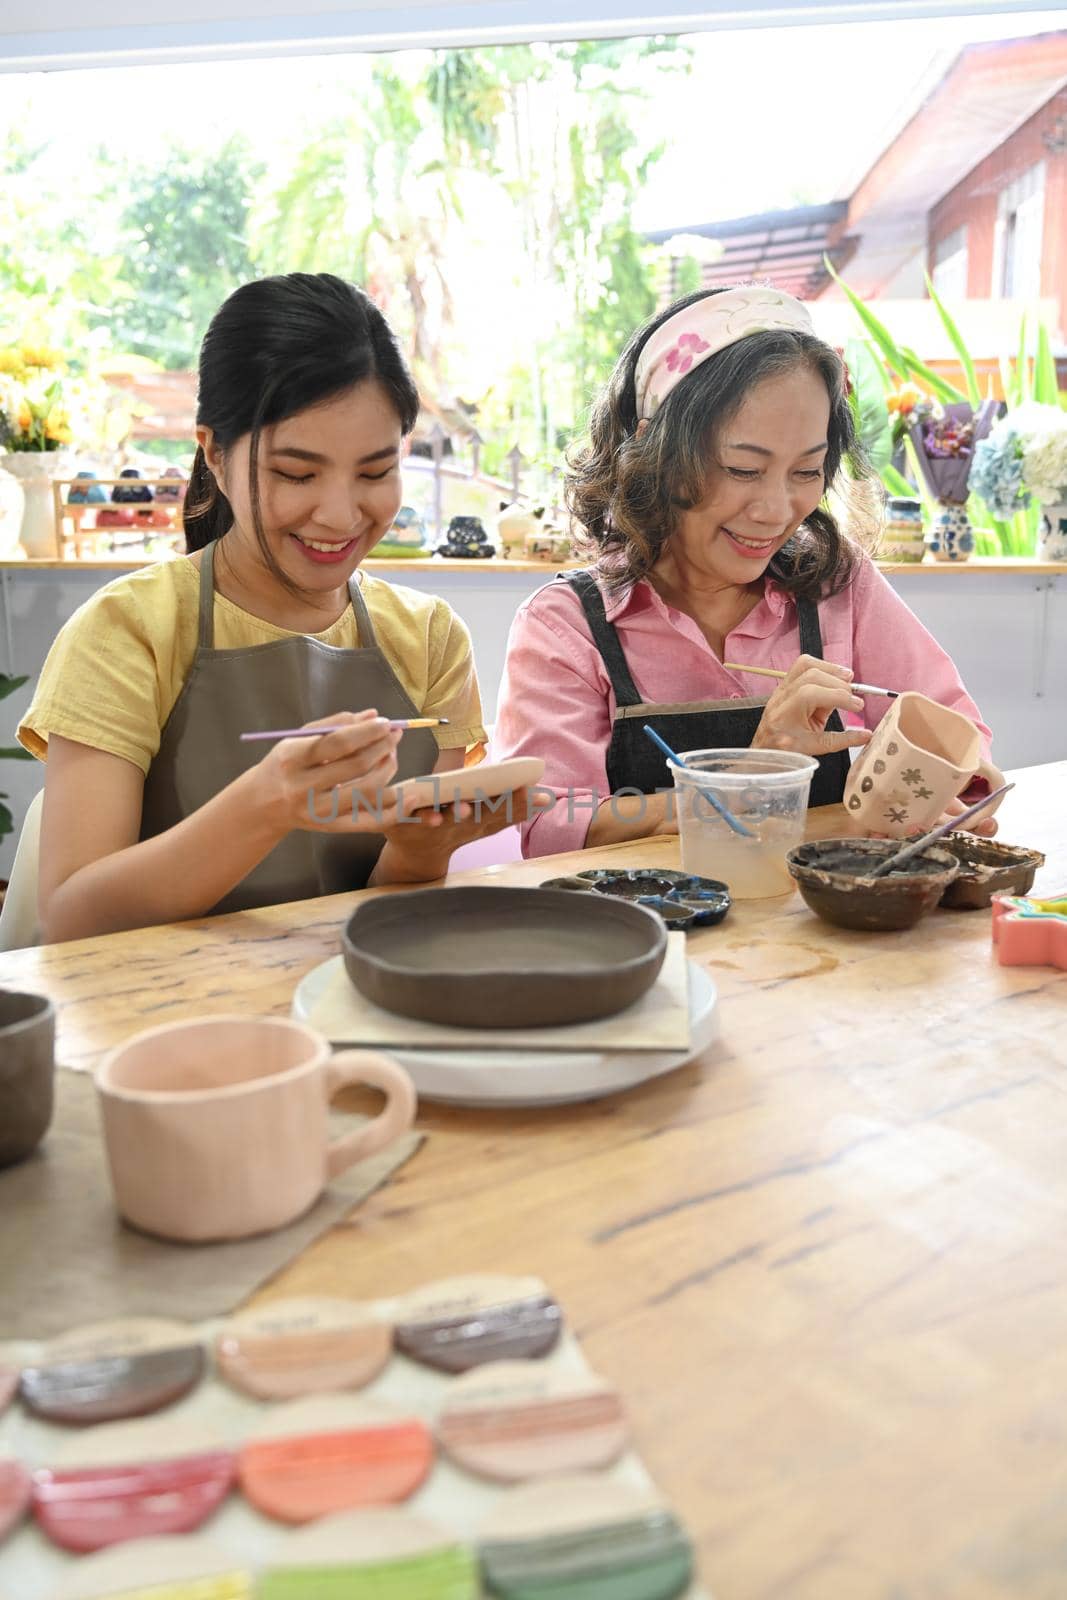 Middle aged woman and young woman making ceramics in craft studio workshop. Activity, handicraft, hobbies concept.